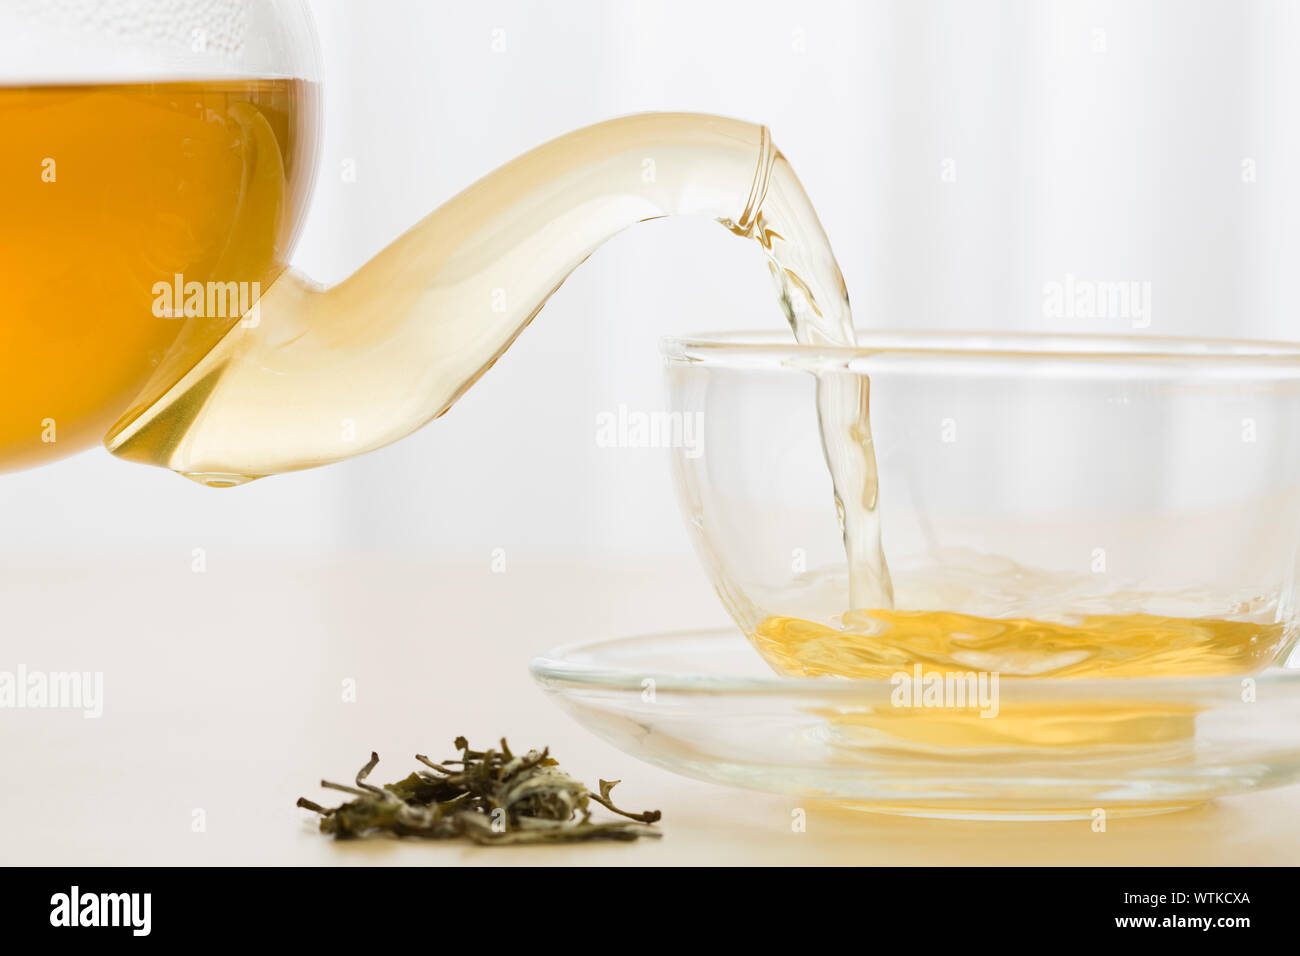 Green tea being poured into cup Stock Photo